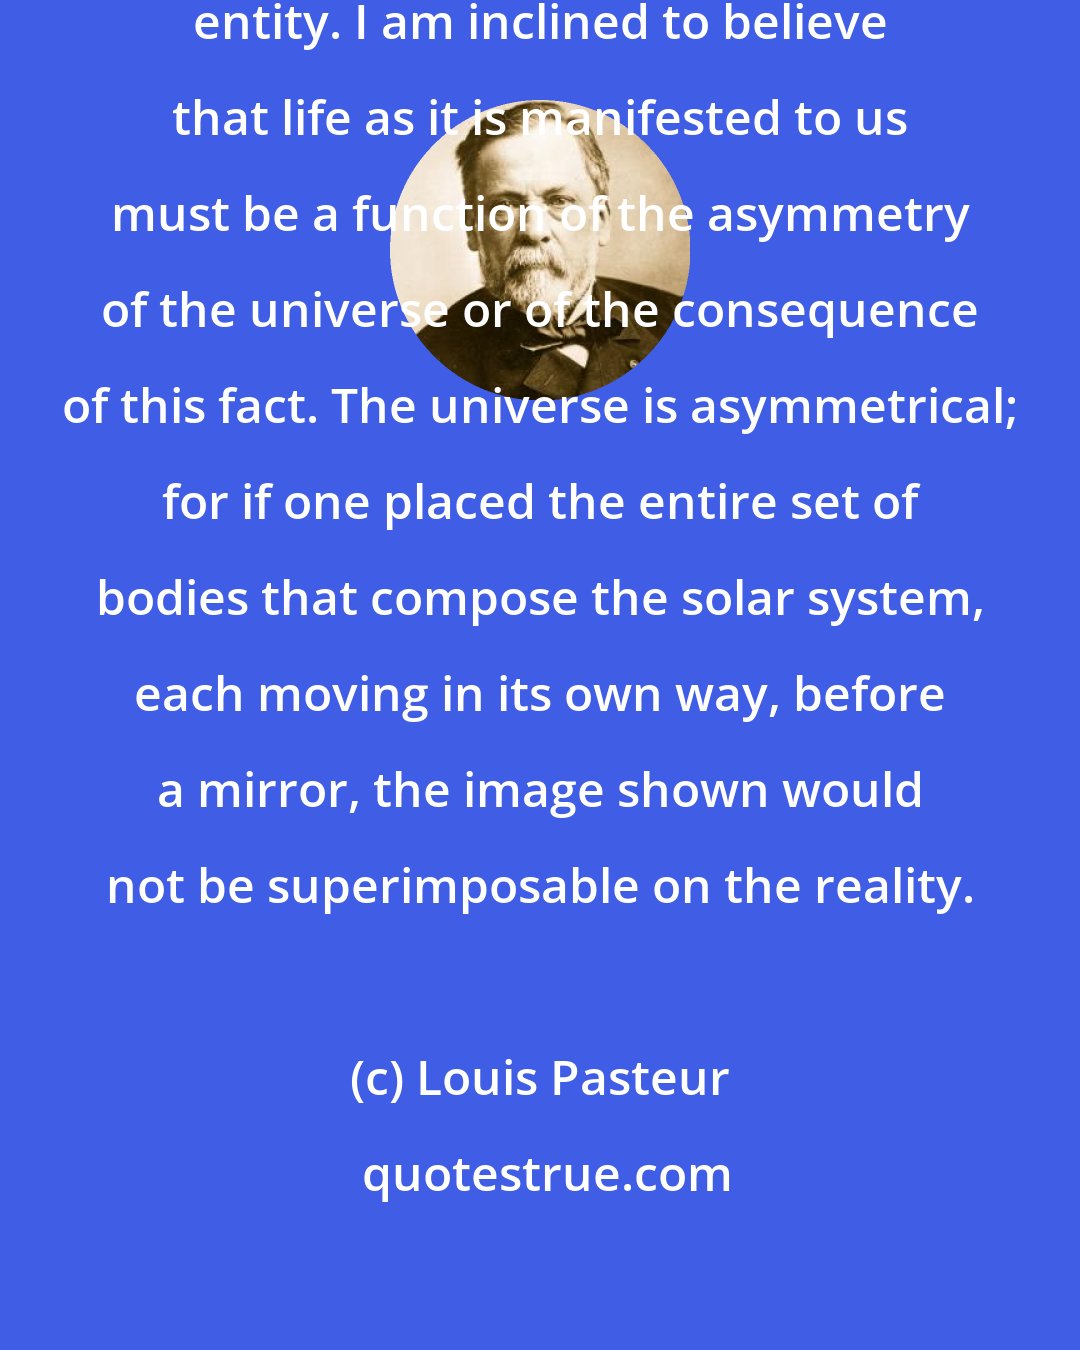 Louis Pasteur: The universe is an asymmetrical entity. I am inclined to believe that life as it is manifested to us must be a function of the asymmetry of the universe or of the consequence of this fact. The universe is asymmetrical; for if one placed the entire set of bodies that compose the solar system, each moving in its own way, before a mirror, the image shown would not be superimposable on the reality.